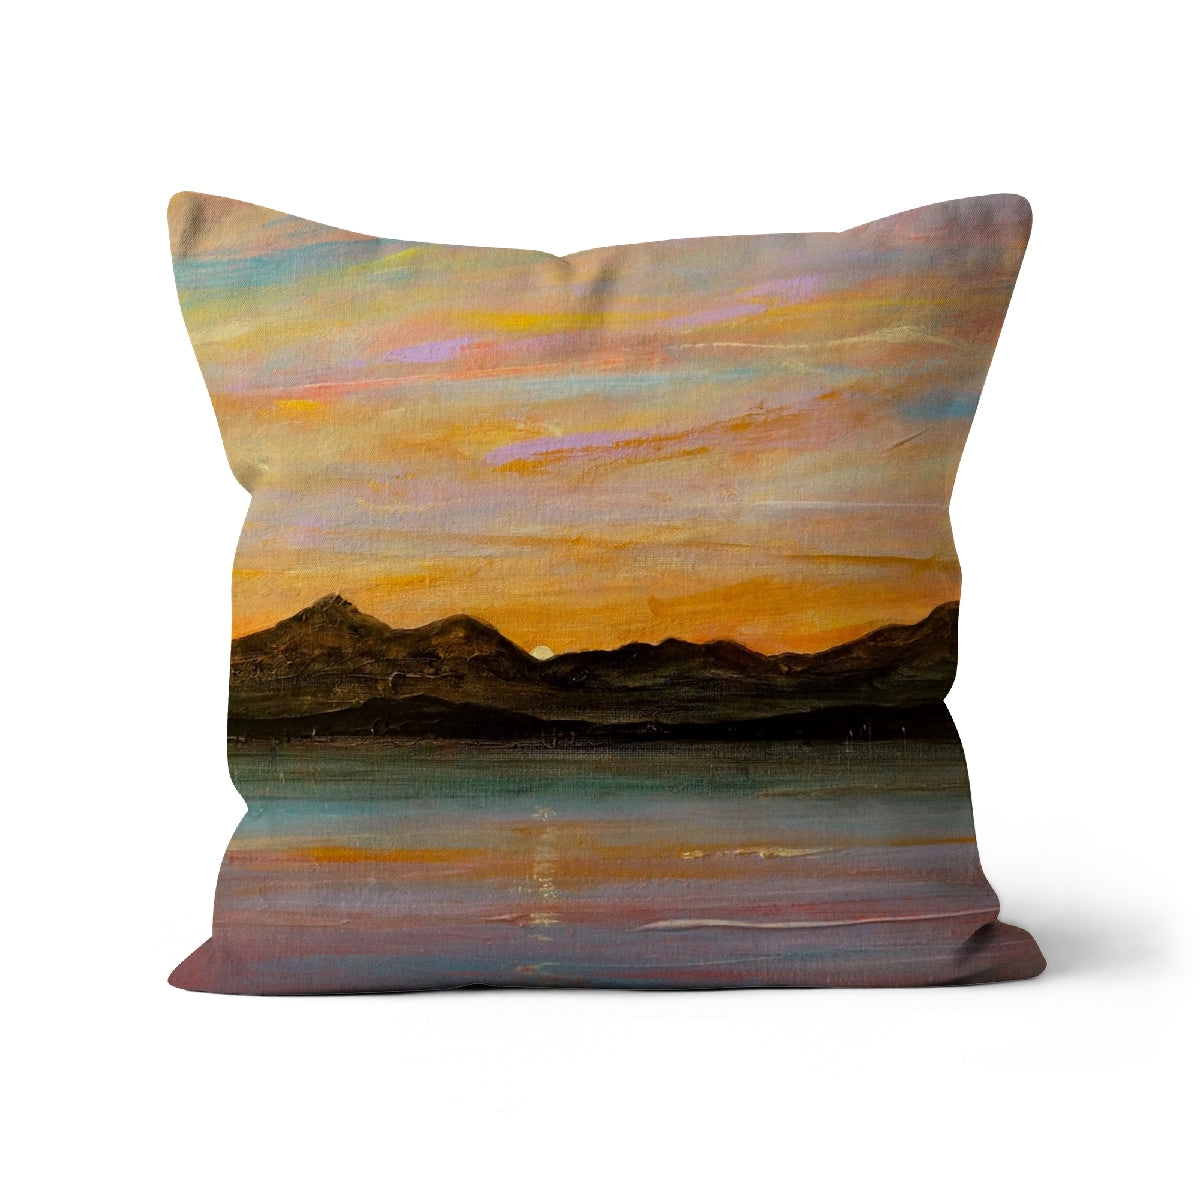 The Sleeping Warrior Arran Art Gifts Cushion-Cushions-Arran Art Gallery-Faux Suede-22"x22"-Paintings, Prints, Homeware, Art Gifts From Scotland By Scottish Artist Kevin Hunter